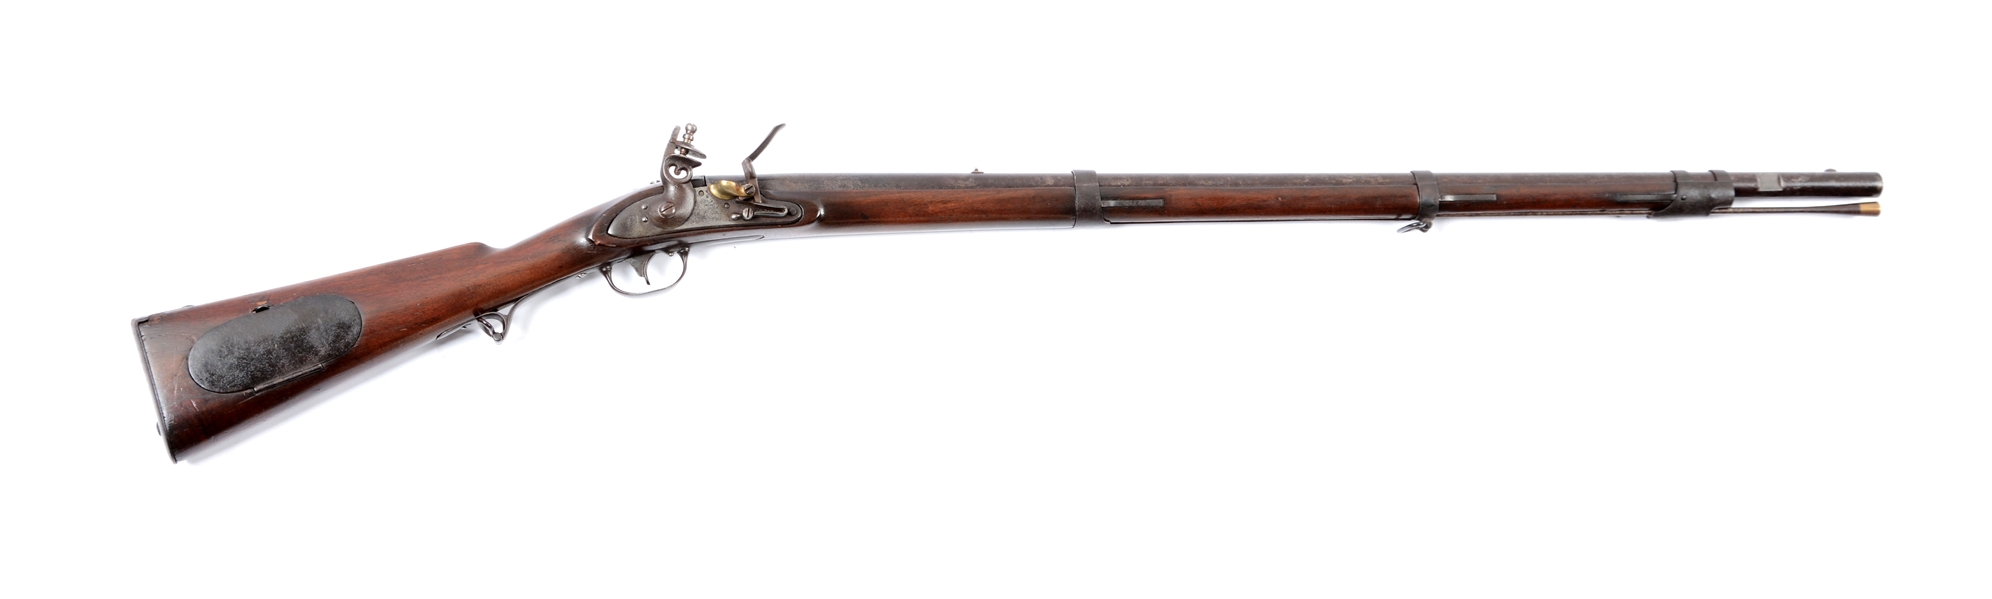 (A) U.S. MODEL 1817 FLINTLOCK "COMMON RIFLE" BY S. NORTH DATED 1826.